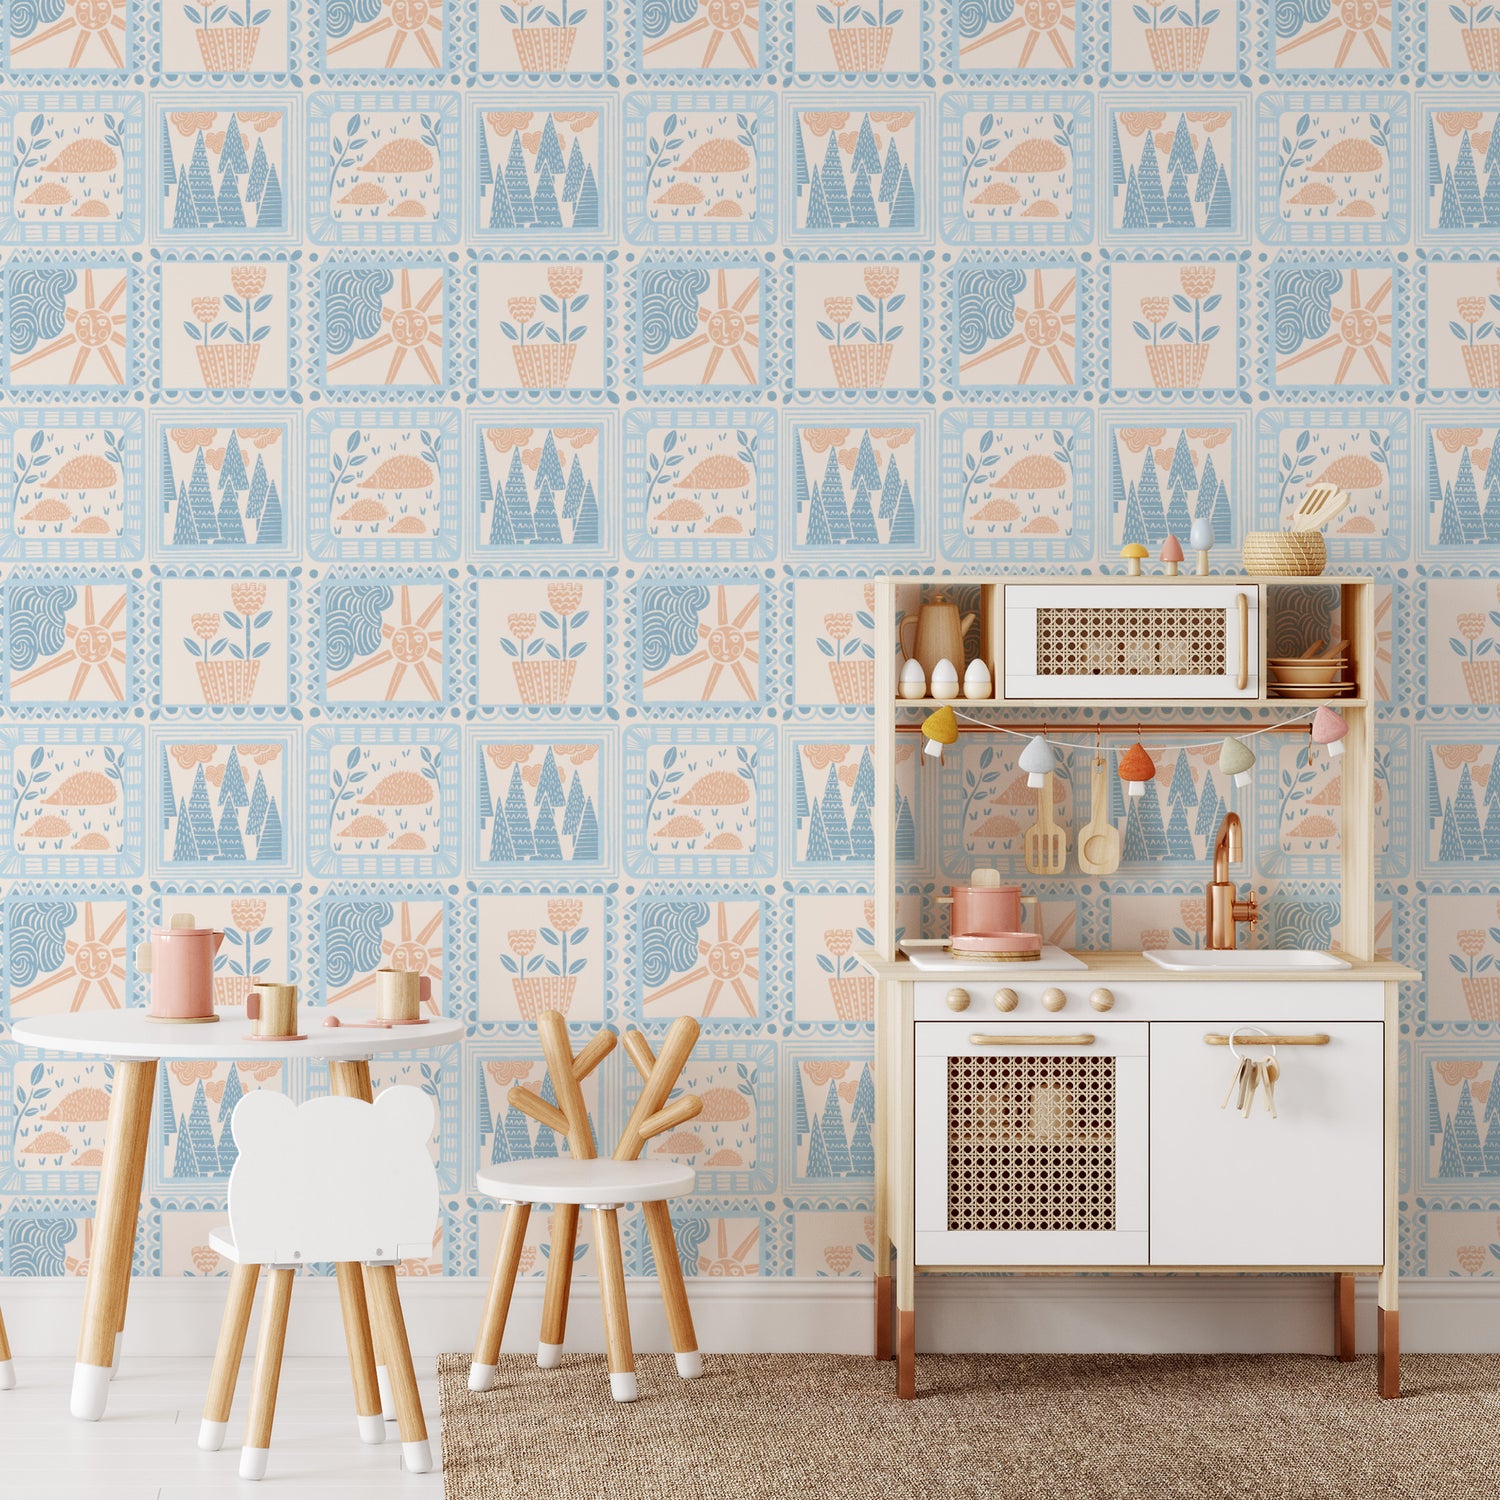 Woodland Frames Wallpaper in Blue shown in a kids play room.